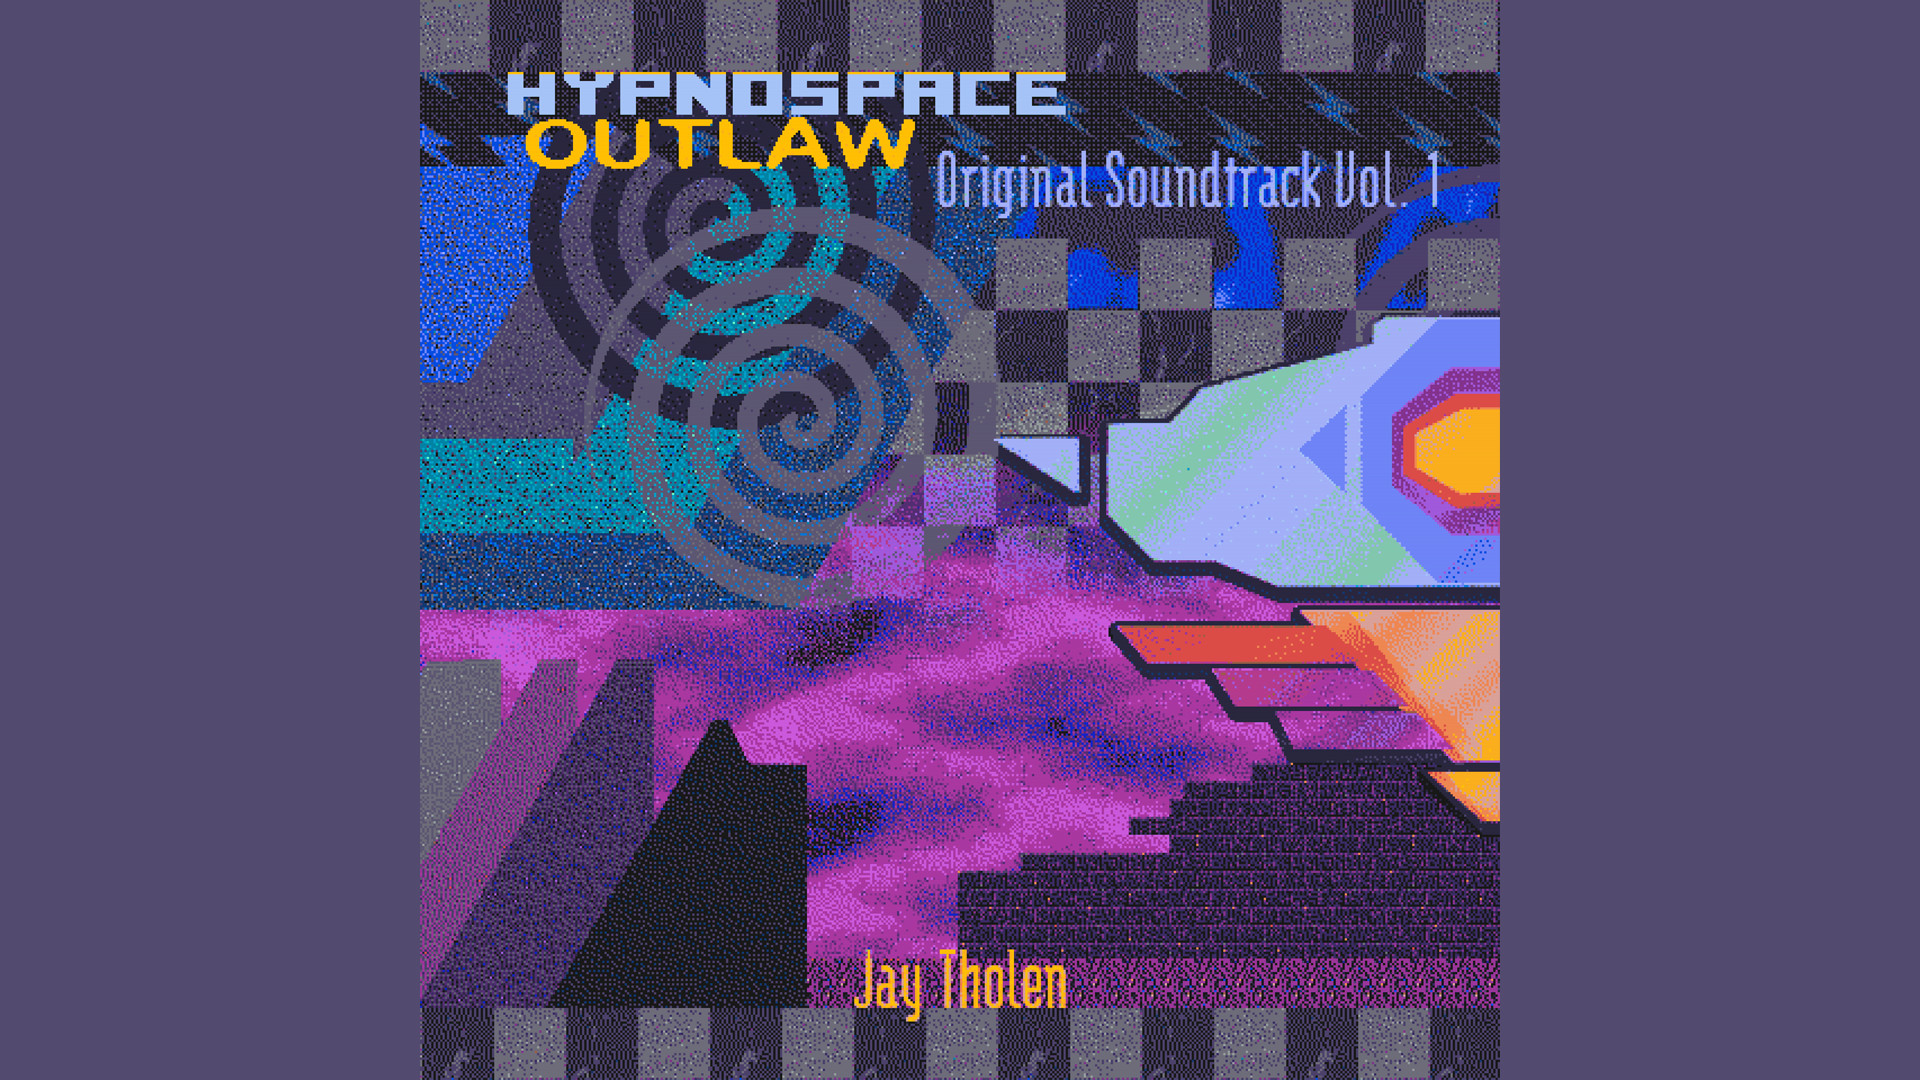 Hypnospace Outlaw download the last version for ipod